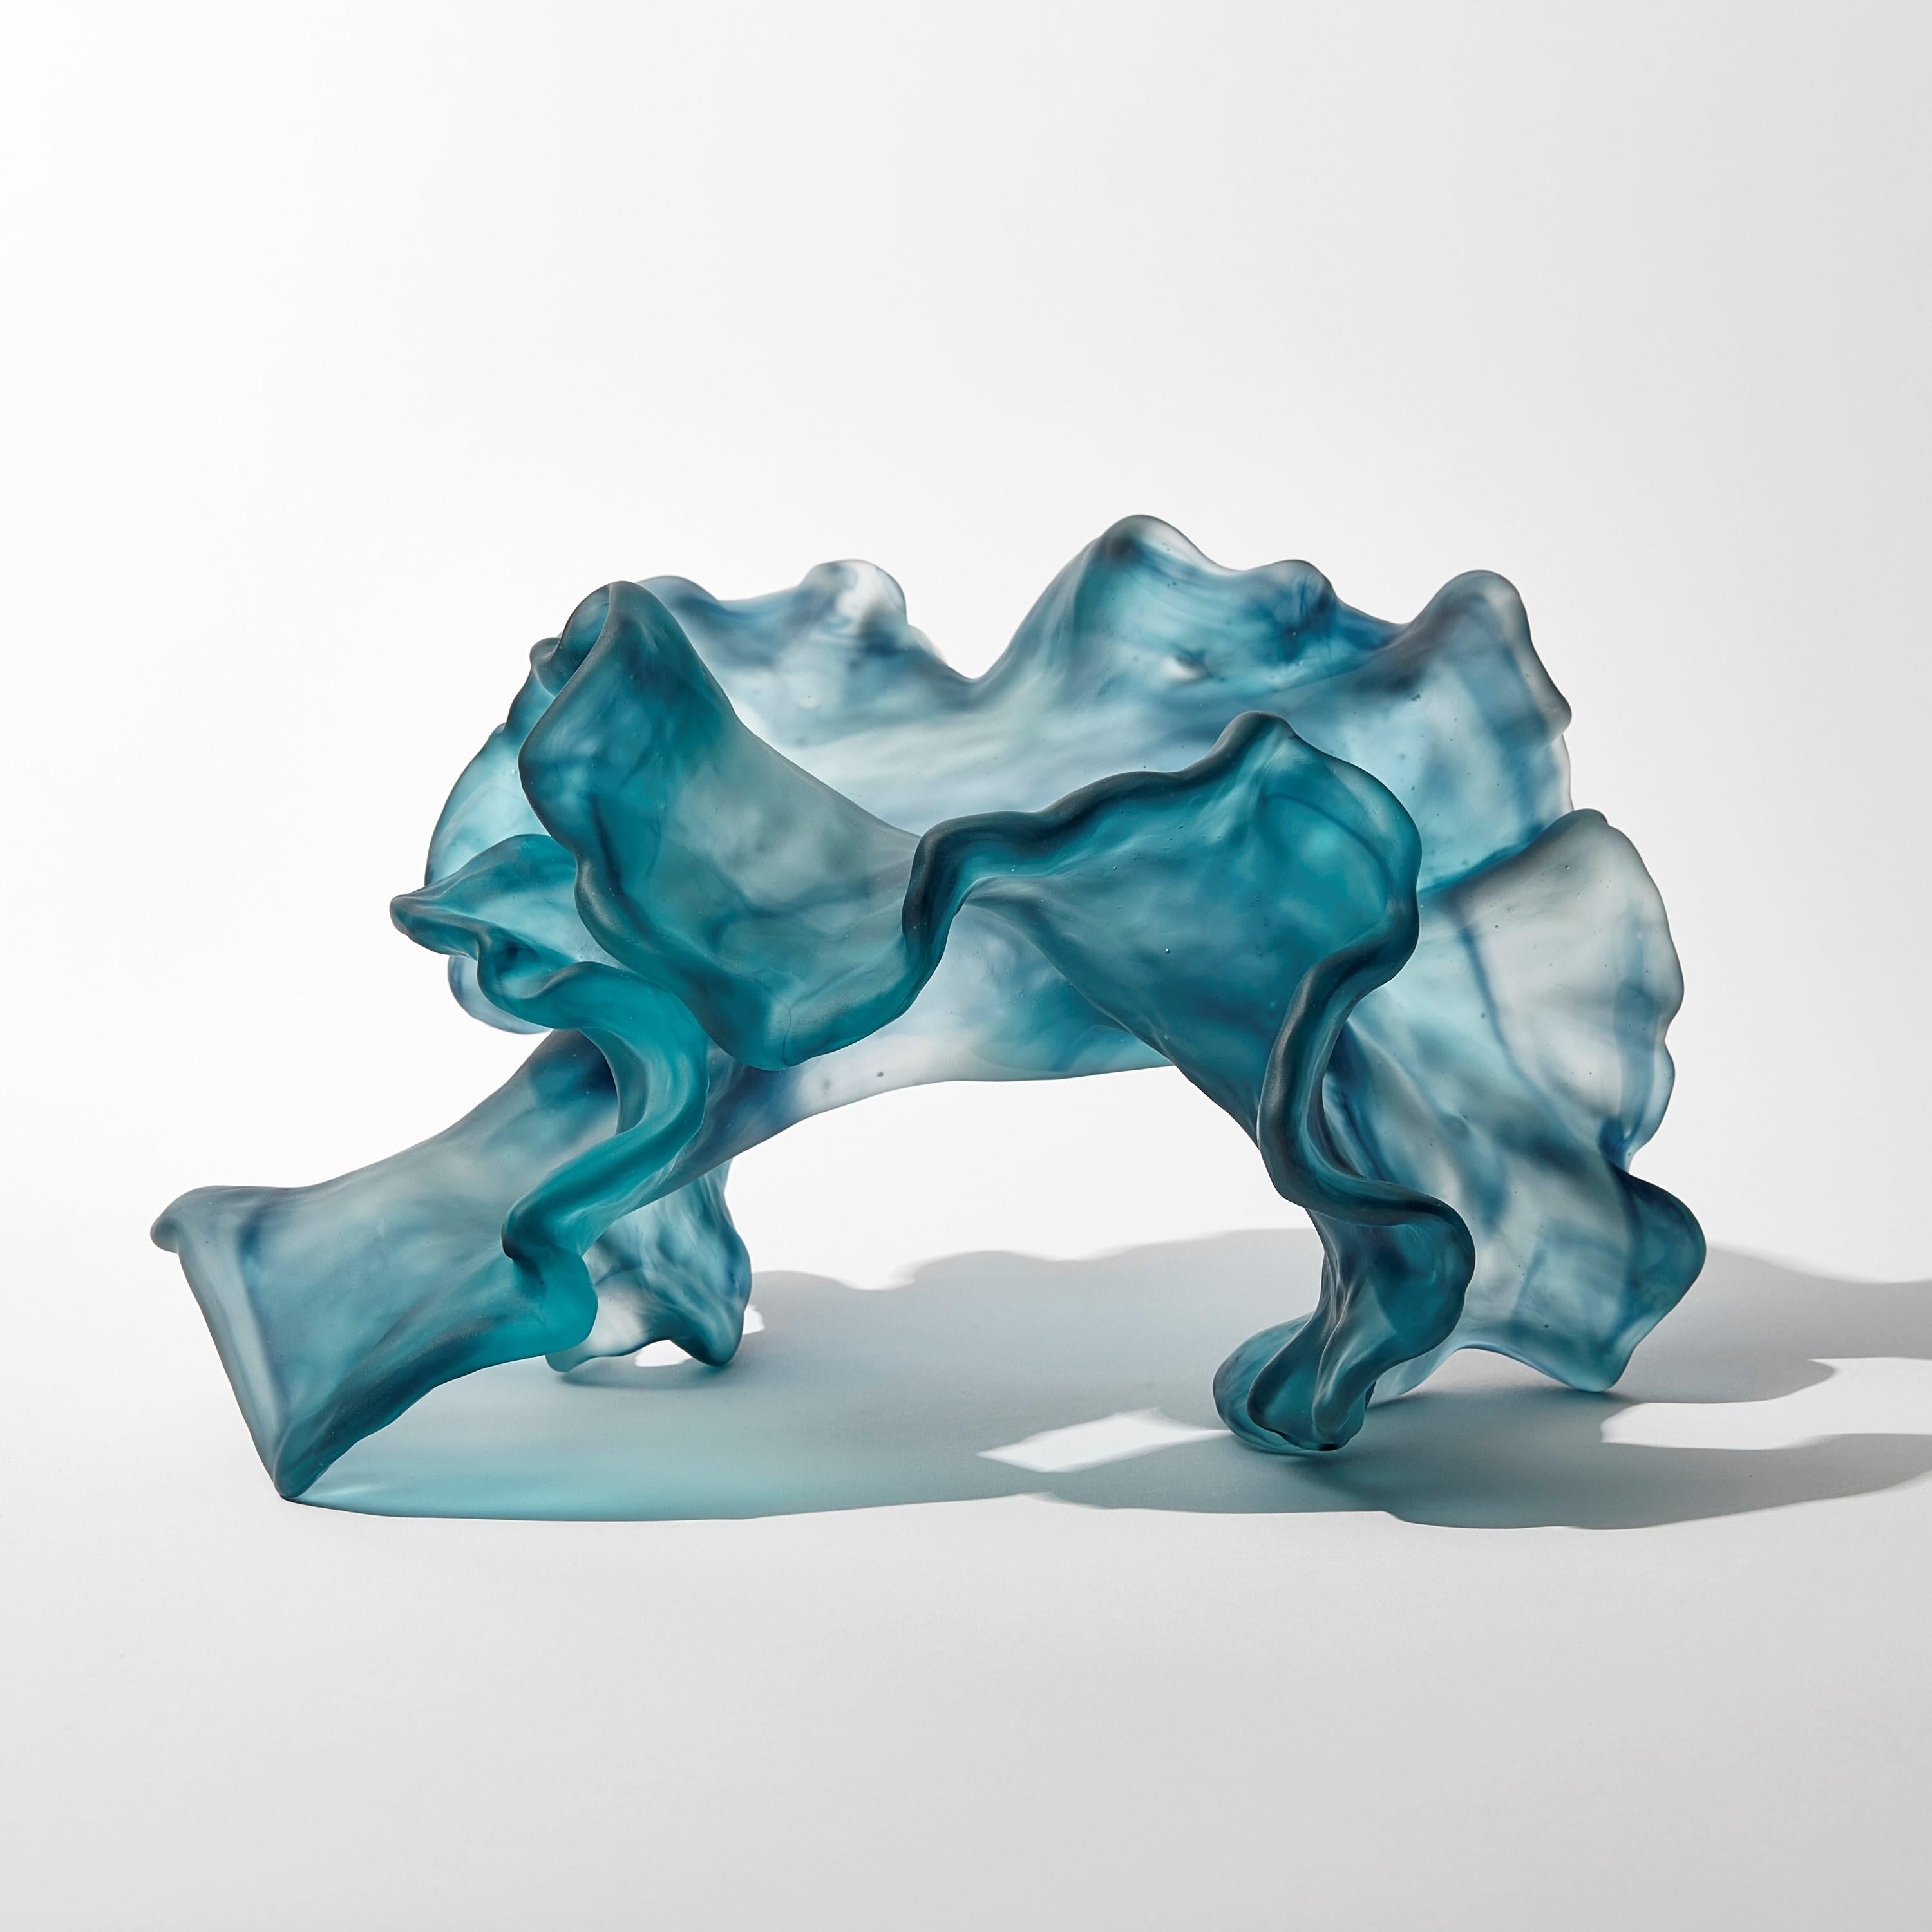 'Floating Twist' is a unique cast glass sculpture by the Danish artist, Monette Larsen.

Larsen has always been fascinated by the concept of beauty within nature; what makes something beautiful and the characteristics that define it as such. Her